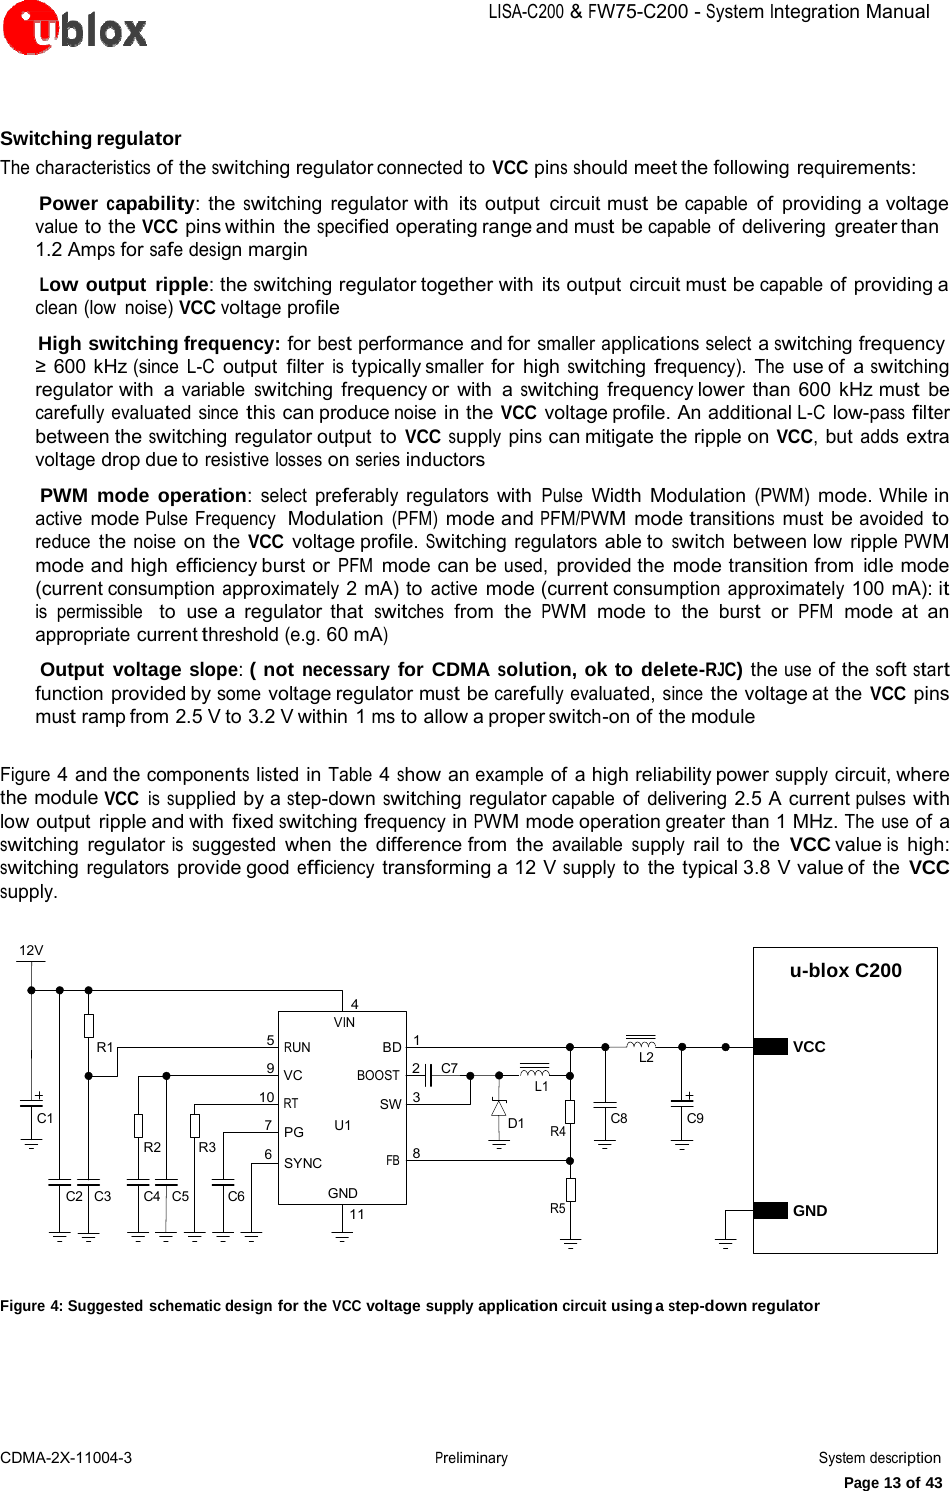 LISA-C200&amp;FW75-C200-System IntegrationManualCDMA-2X-11004-3 PreliminarySystem descriptionPage 13 of 43Switching regulator The characteristics of the switching regulator connected to VCC pins should meet the following requirements:     Power capability: the switching regulator with its output circuit must be capable of providing a voltage value to the VCC pins within  the specified operating range and must be capable of delivering greater than 1.2 Amps for safe design margin     Low output ripple: the switching regulator together with its output circuit must be capable of providing a clean (low  noise) VCC voltage profile     High switching frequency: for best performance and for smaller applications select a switching frequency  600 kHz (since L-C output filter is typically smaller for high switching frequency). The use of  a switching regulator with  a variable switching frequency or with  a switching frequency lower than 600 kHz must be carefully evaluated since this can produce noise in the VCC voltage profile. An  additional L-C low-pass filter between the switching regulator output to VCC supply pins can mitigate the ripple on VCC, but adds extra voltage drop due to resistive losses on series inductors     PWM mode operation: select preferably regulators with Pulse Width Modulation (PWM) mode. While in active mode Pulse Frequency  Modulation (PFM) mode and PFM/PWM mode transitions must be avoided to reduce the noise on the VCC voltage profile. Switching regulators able to switch between low ripple PWM mode and high efficiency burst or PFM mode can be used, provided the  mode transition from  idle mode (current consumption approximately 2 mA) to active mode (current consumption approximately 100 mA): it is  permissible   to use a regulator that switches  from  the PWM  mode to  the burst  or PFM  mode at an appropriate current threshold (e.g. 60 mA)     Output voltage slope: ( not necessary for CDMA solution, ok to delete-RJC) the use of the soft start function provided by some voltage regulator must be carefully evaluated, since the voltage at the VCC pins must ramp from 2.5 V to 3.2 V within 1 ms to allow a proper switch-on of the module Figure 4 and the components listed in Table 4 show an example of a high reliability power supply circuit, where the module VCC is supplied by a step-down switching regulator capable of delivering 2.5 A current pulses with low output ripple and with fixed switching frequency in PWM mode operation greater than 1 MHz. The use of a switching regulator is suggested when the difference from the available supply rail to the VCC value is high: switching regulators provide good efficiency transforming a 12 V supply to the typical 3.8 V value of the VCC supply. 12V u-blox C200 R1 5 9 10 C1 RUN VC RT 4 VIN BD  1 BOOST   2 SW  3 C7    L1 L2 C8 C9 VCC C2   C3 R2 R3 C4   C5  C6 7   PG 6   SYNC U1 GND 11 FB    8 D1 R4 R5 GND Figure 4: Suggested schematic design for the VCC voltage supply application circuit using a step-down regulator 